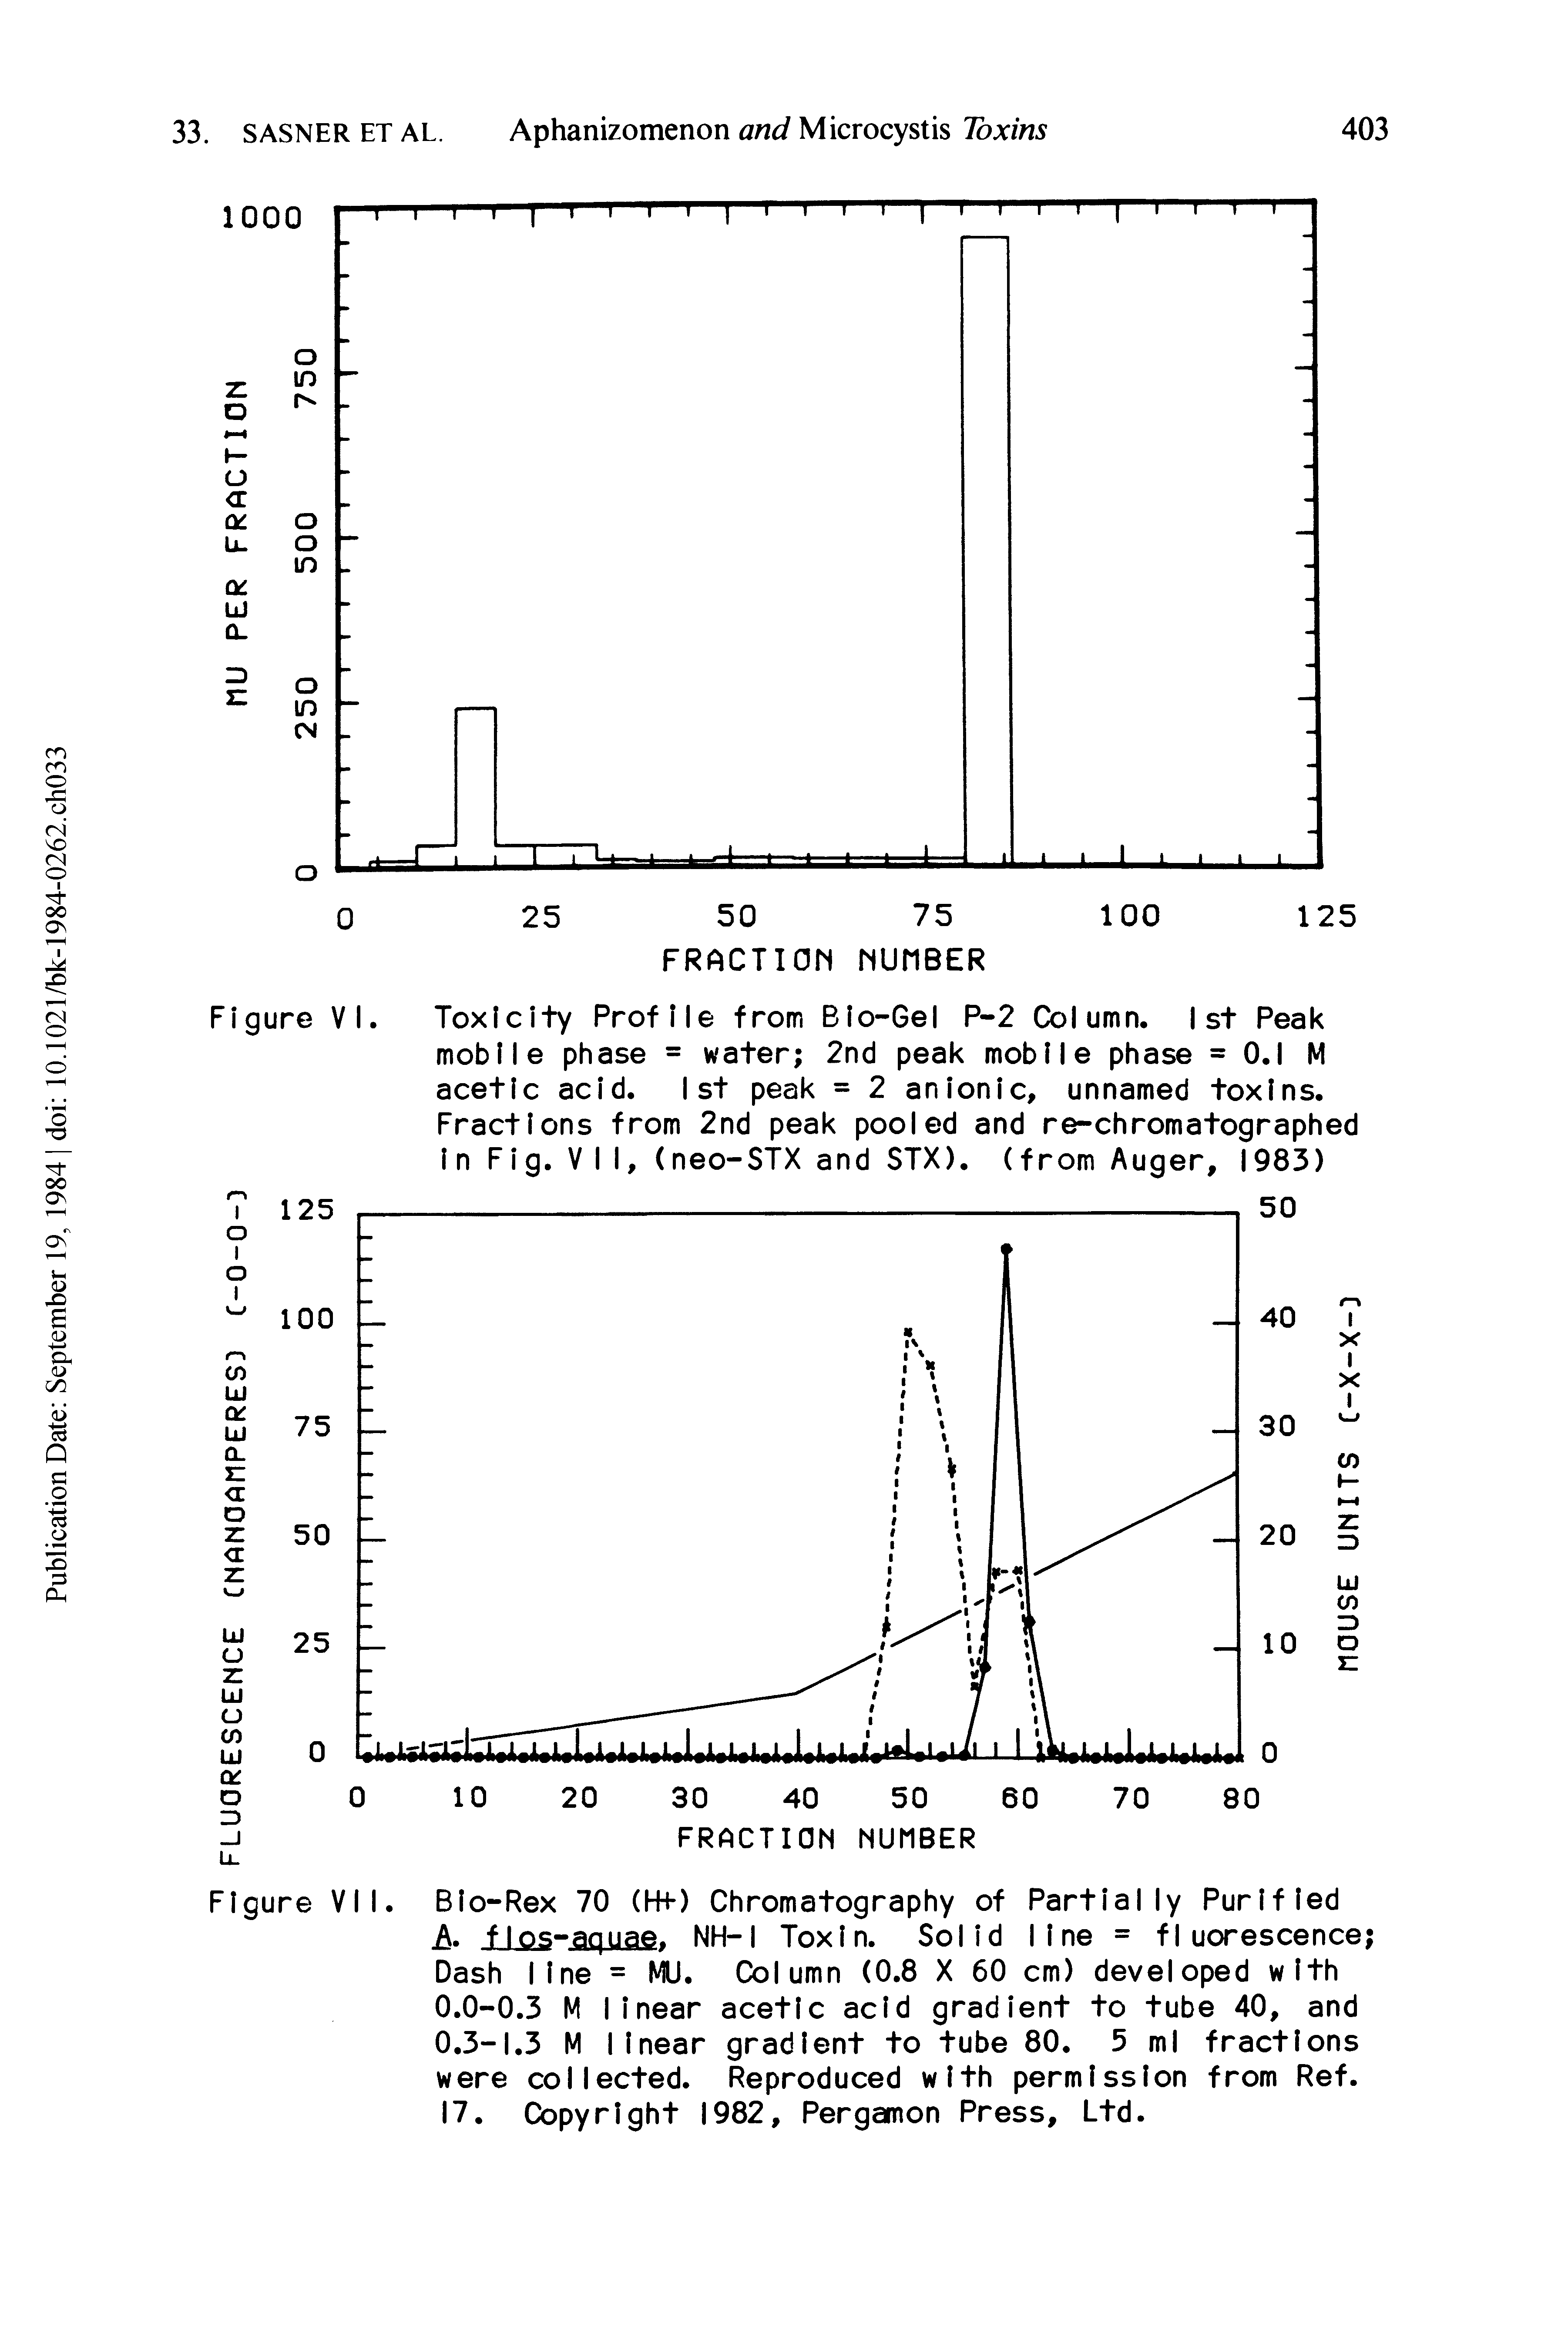 Figure VI. Toxicity Profile from Bio-Gel P-2 Column. 1st Peak mobile phase = water 2nd peak mobile phase = 0.1 M acetic acid. 1st peak = 2 anionic, unnamed toxins. Fractions from 2nd peak pooled and re-chromatographed in Fig. V I I, (neo-STX and STX). (from Auger, 1983)...